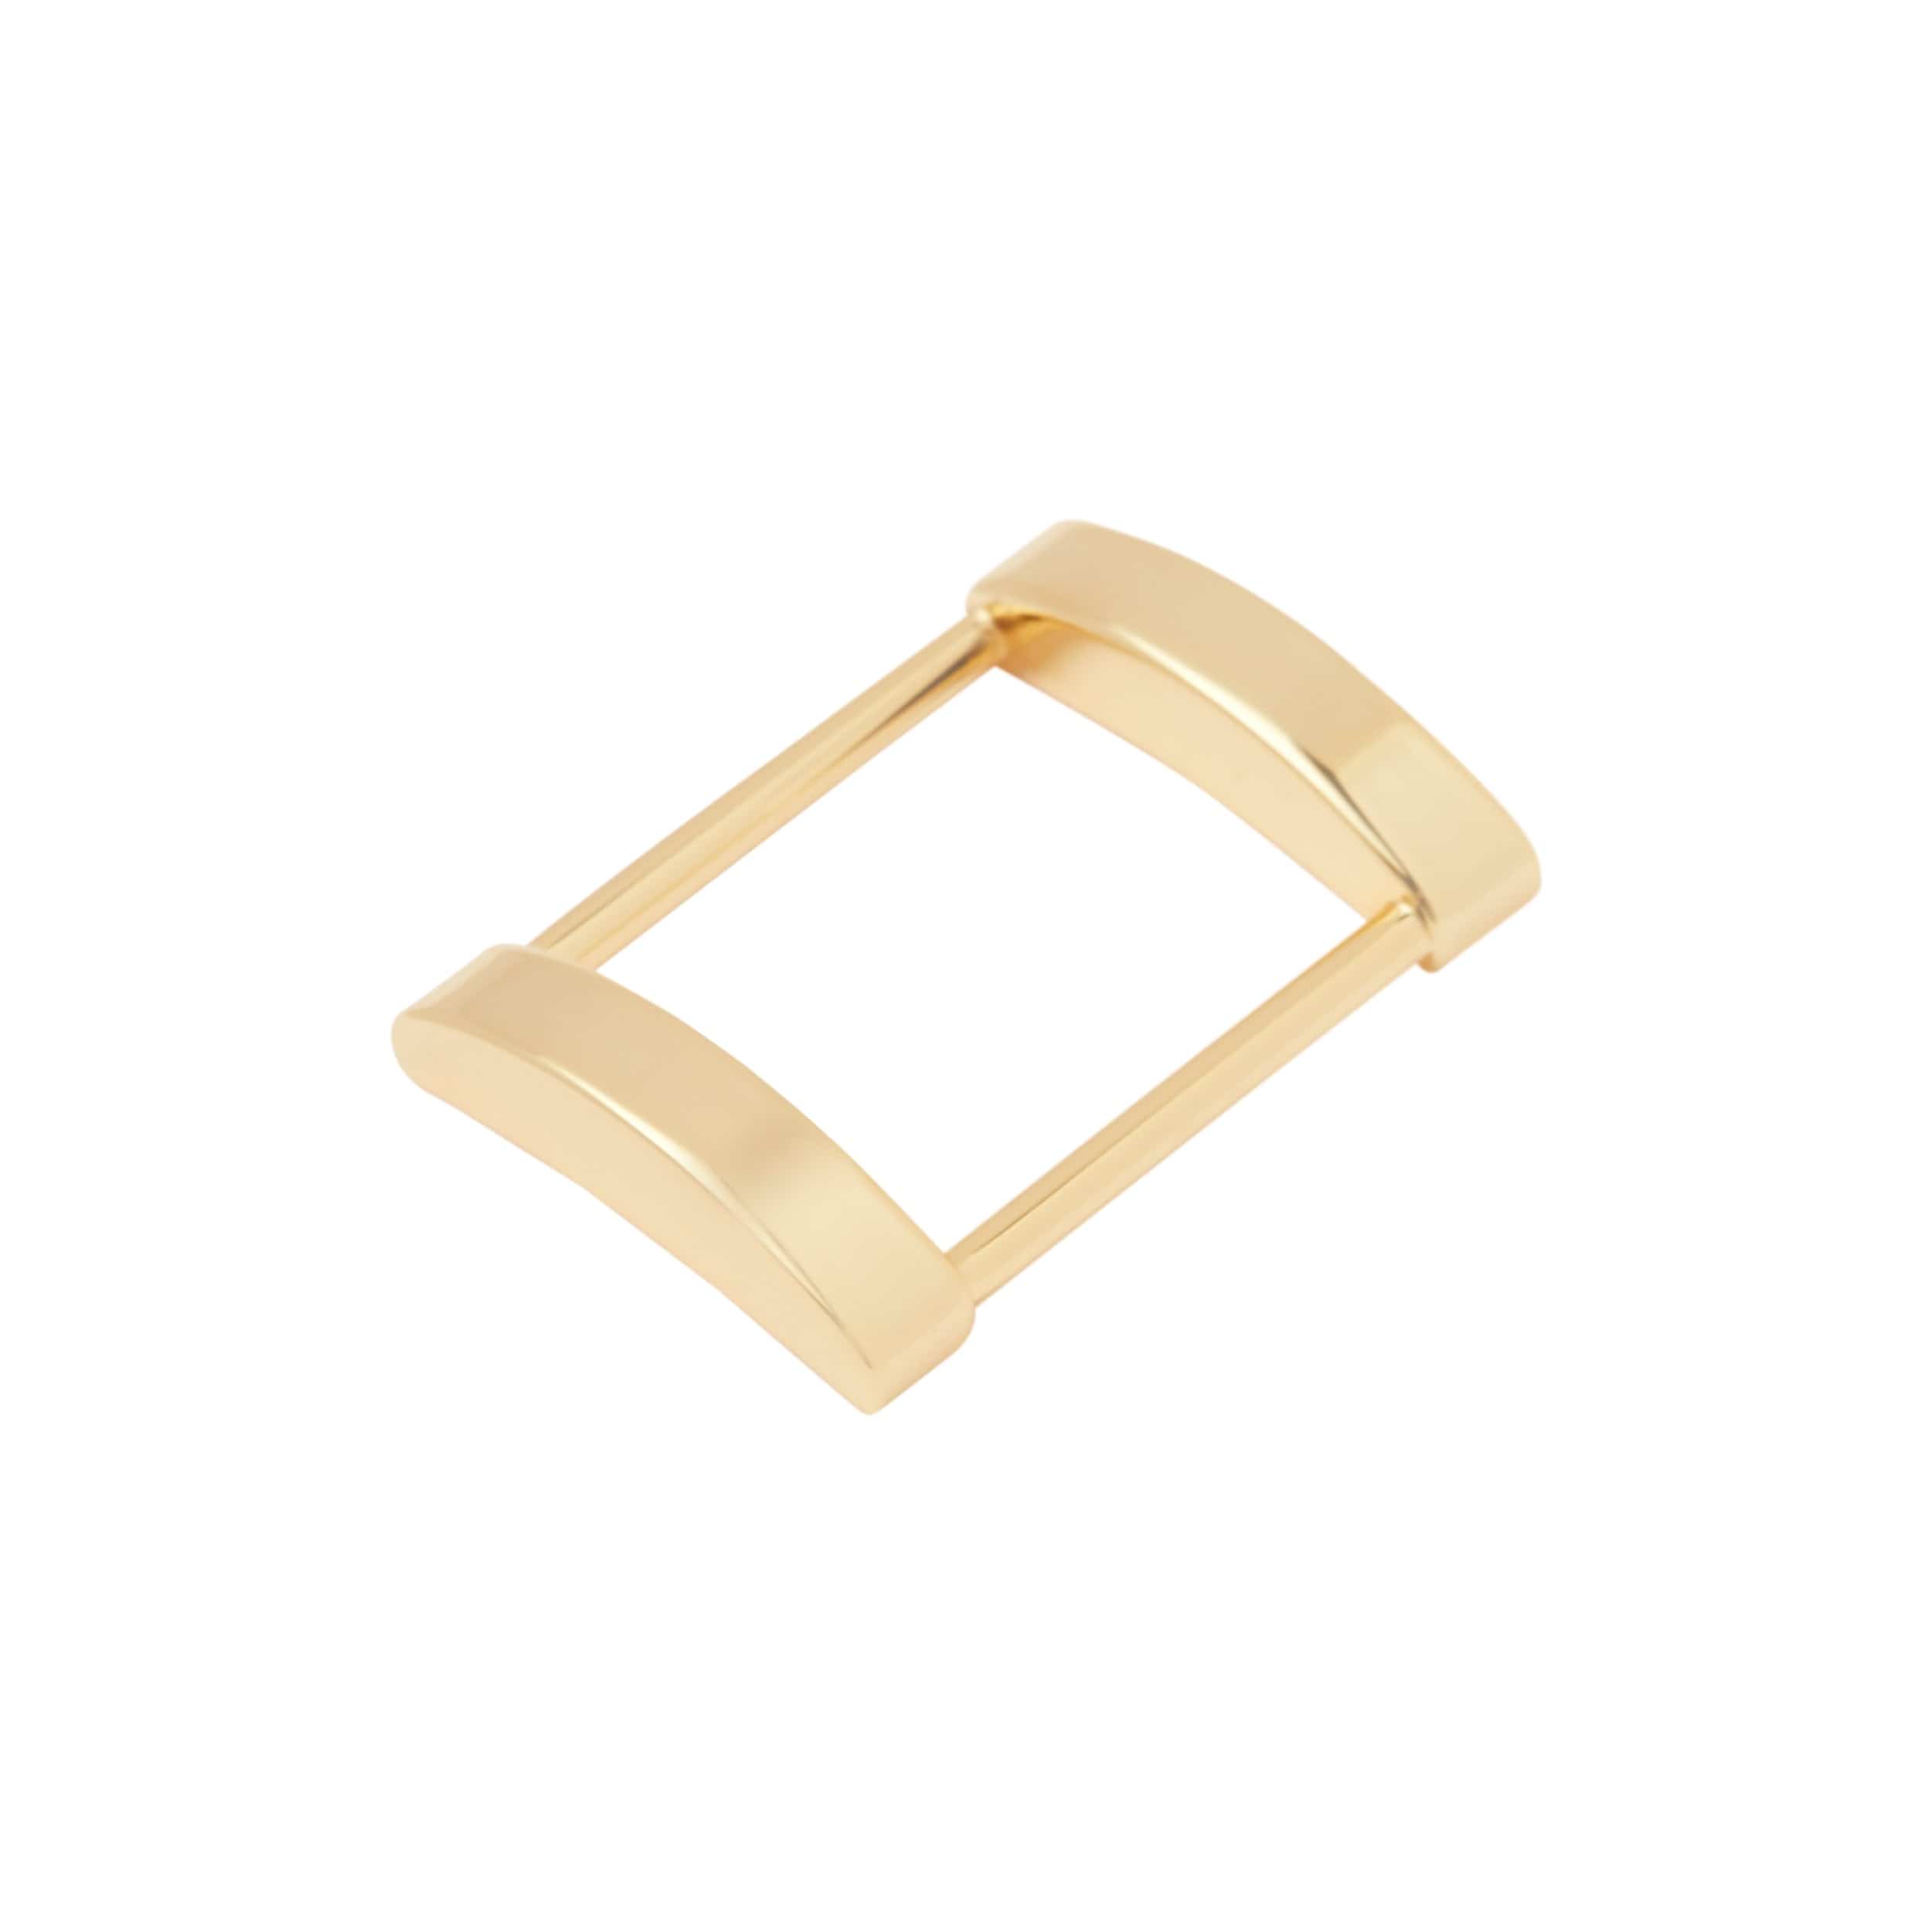 Ohio Travel Bag Rings & Slides 1" Shiny Gold, Solid Concave Rectangular Ring, Zinc Alloy, #P-2559-GOLD P-2559-GOLD